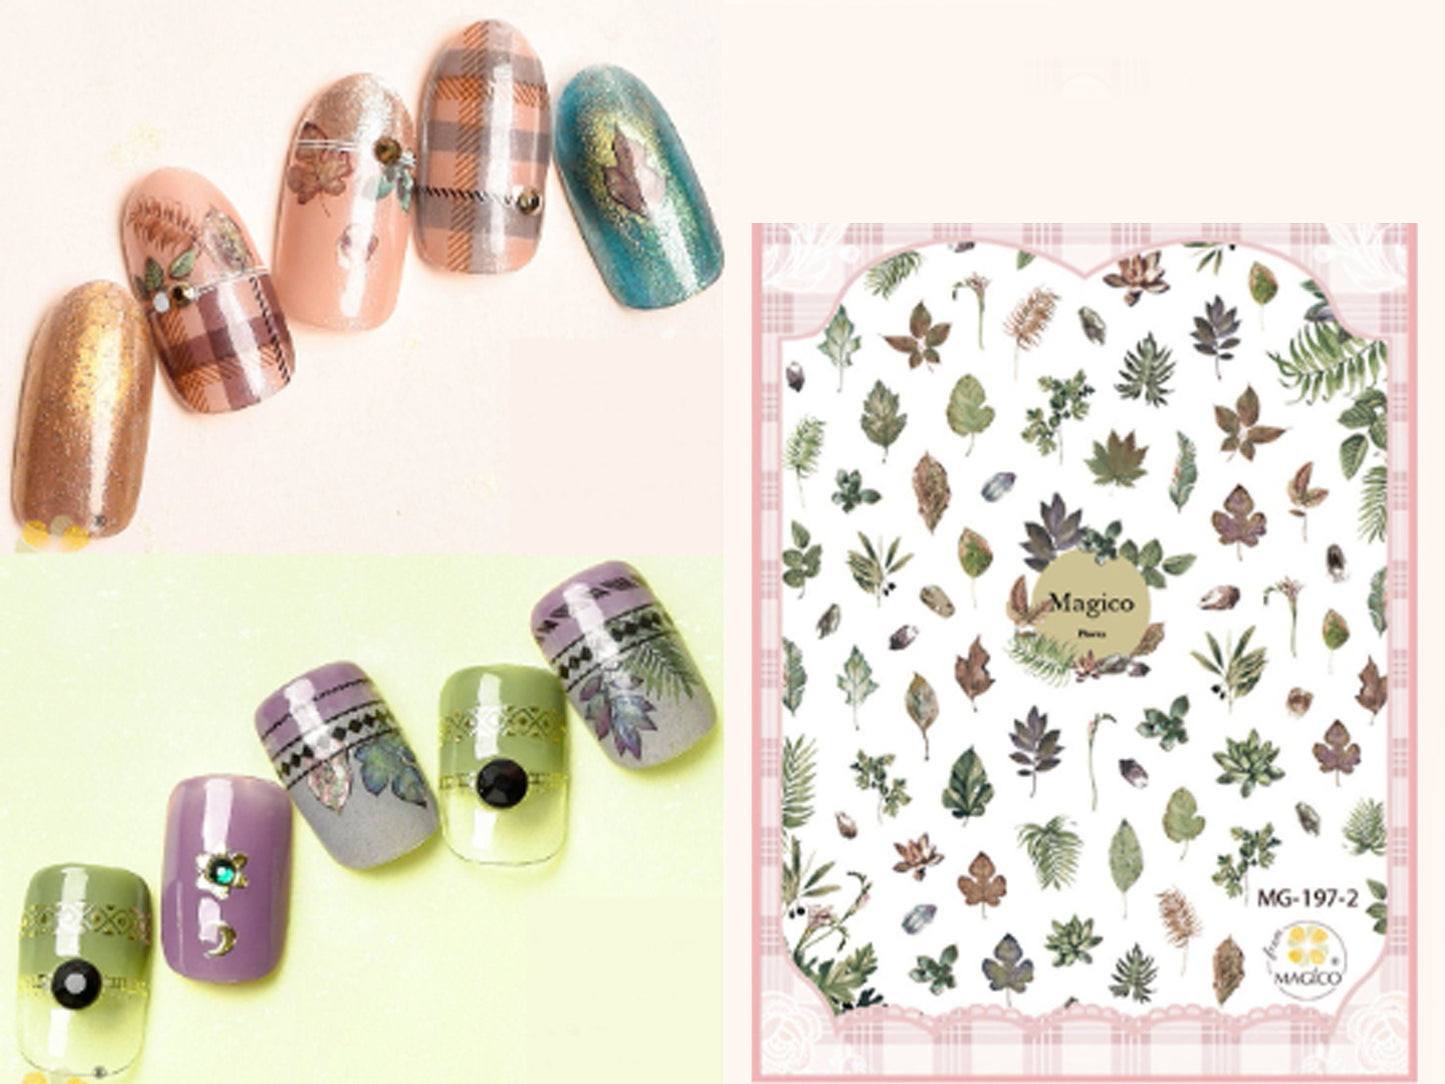 Green leaf Nail Art Sticker/ Leaves Forest fairy Nail DIY Tips Guides Transfer Stickers/Monstera stickers/ Nail art sticker